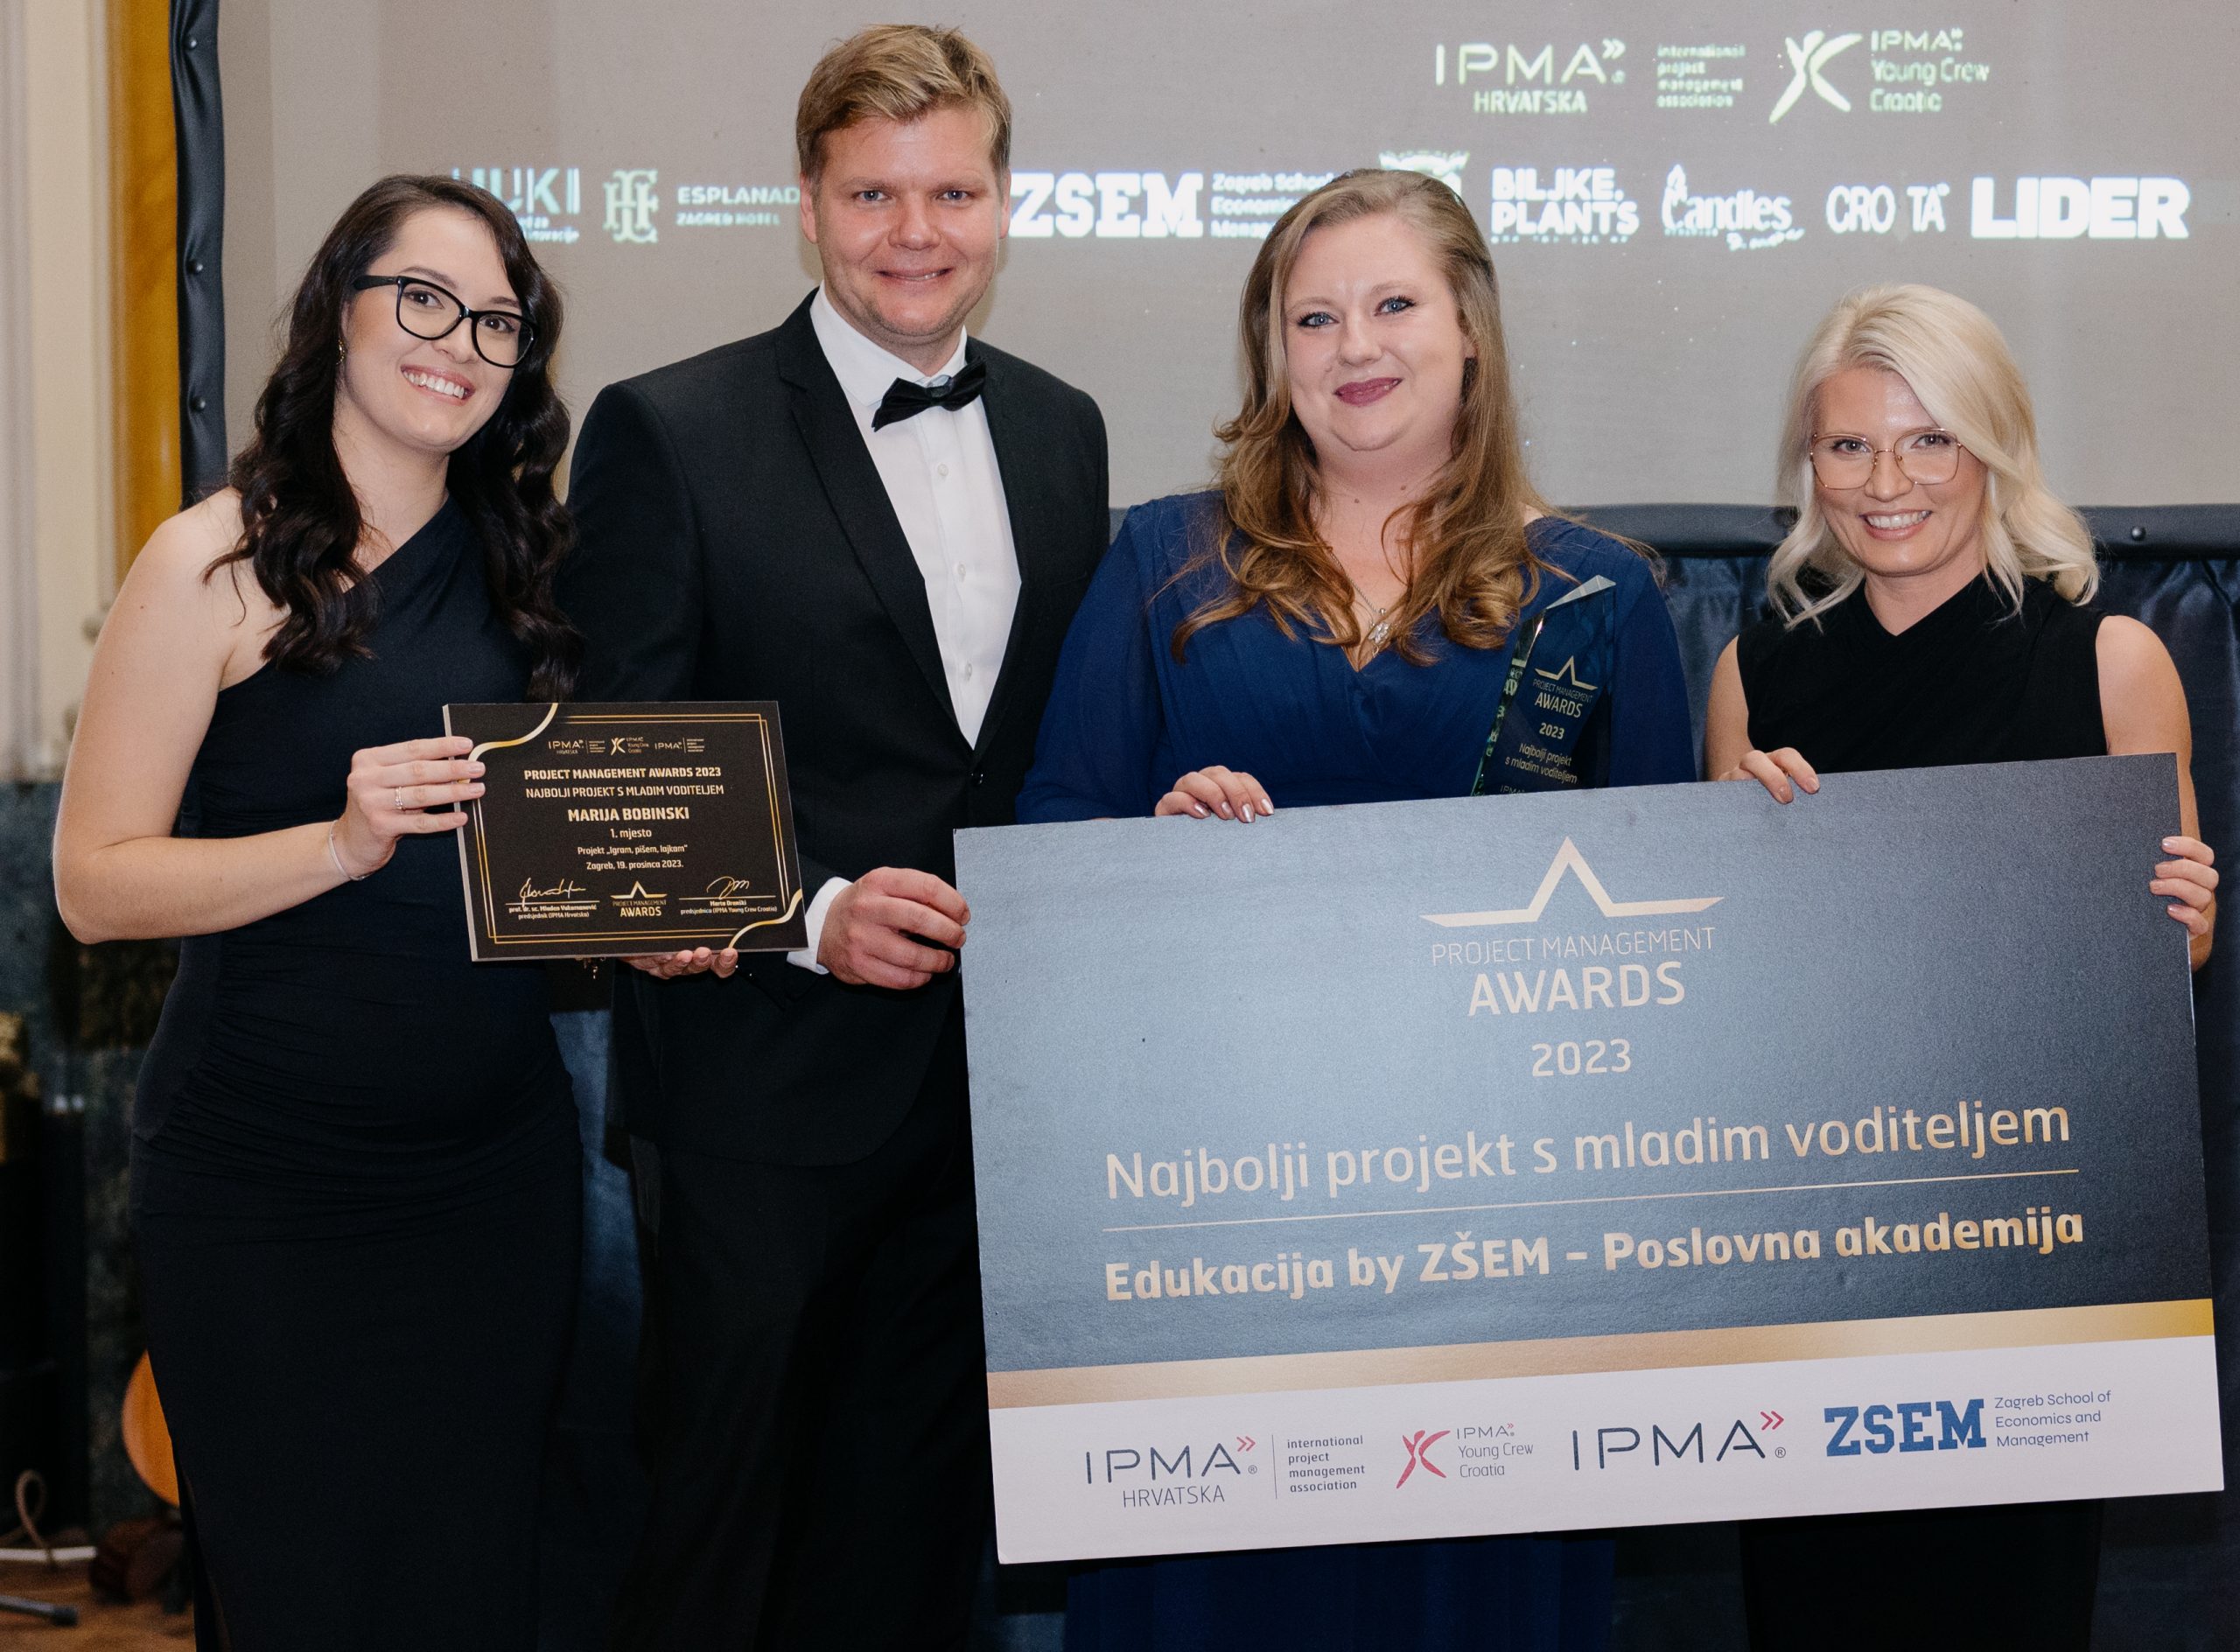 Project Management Awards 2023